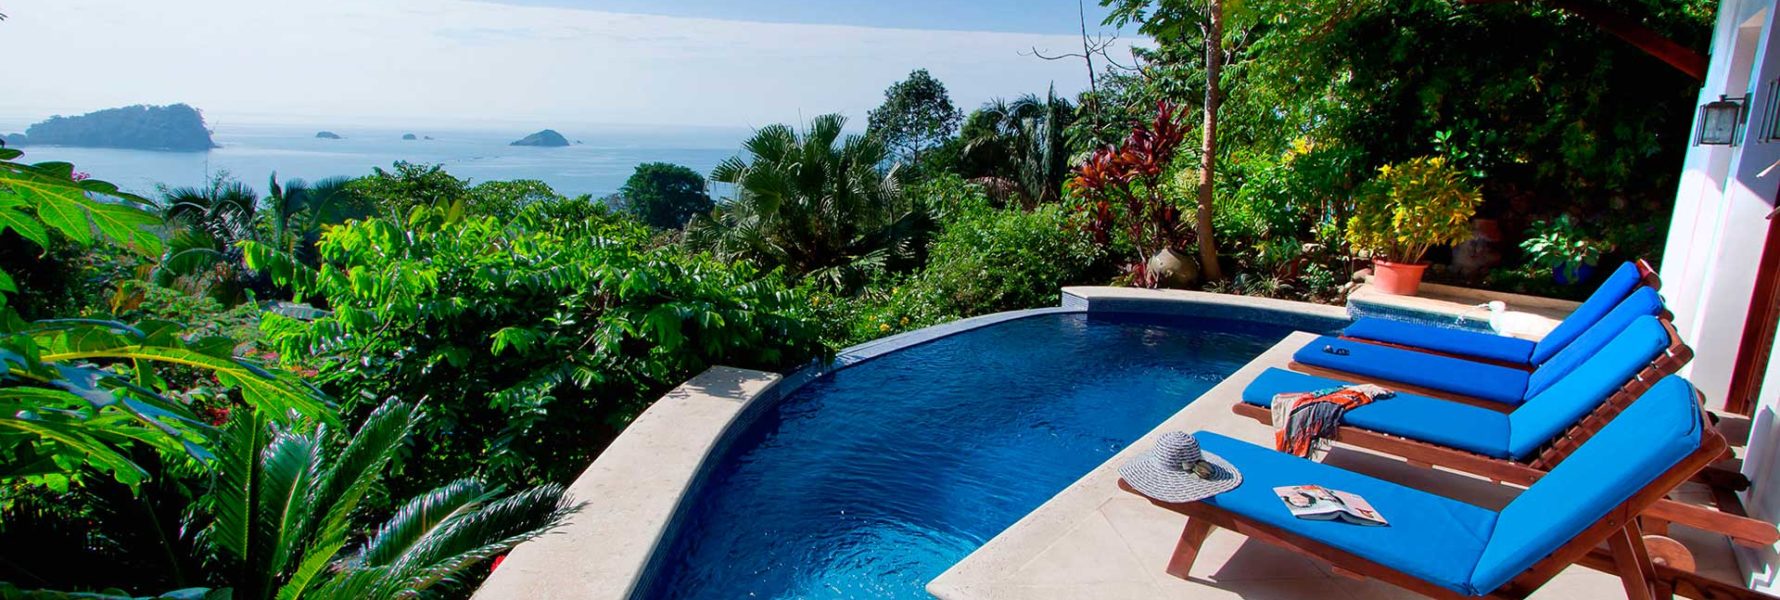 Lounging in the sun by your stunning pool is heaven with a breathtaking view of rainforest and coastline.